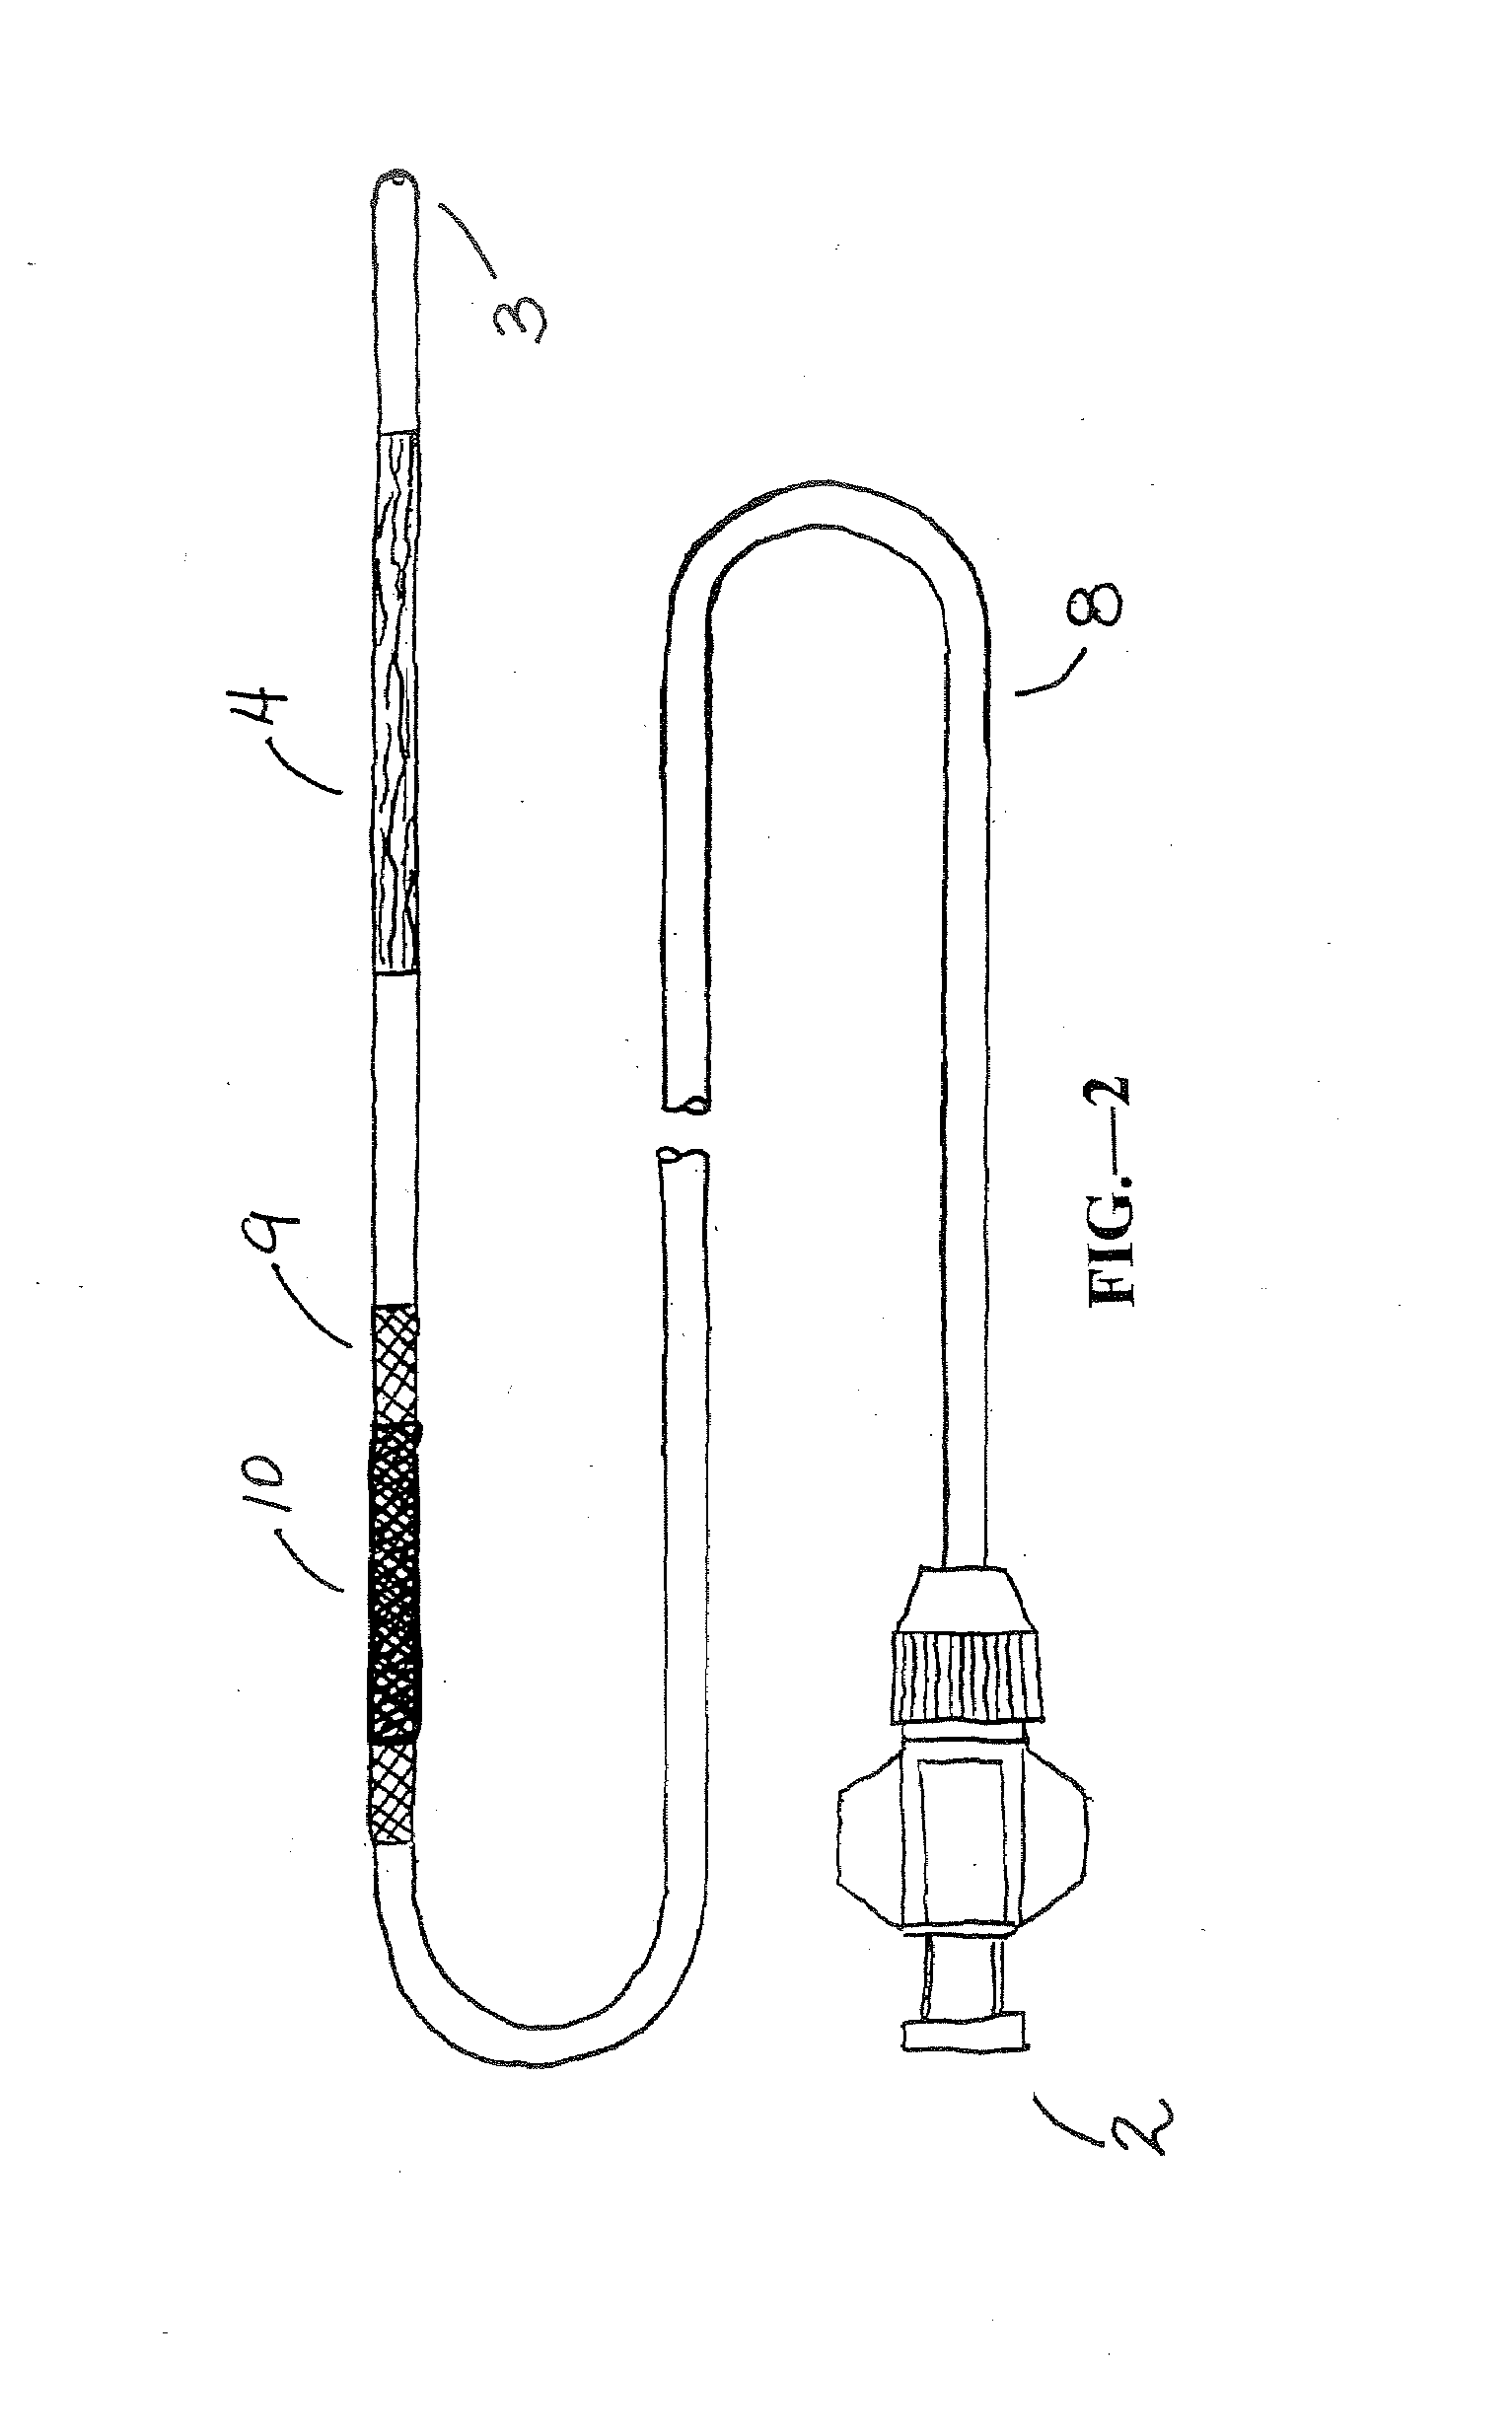 Cardiovascular Devices and Methods